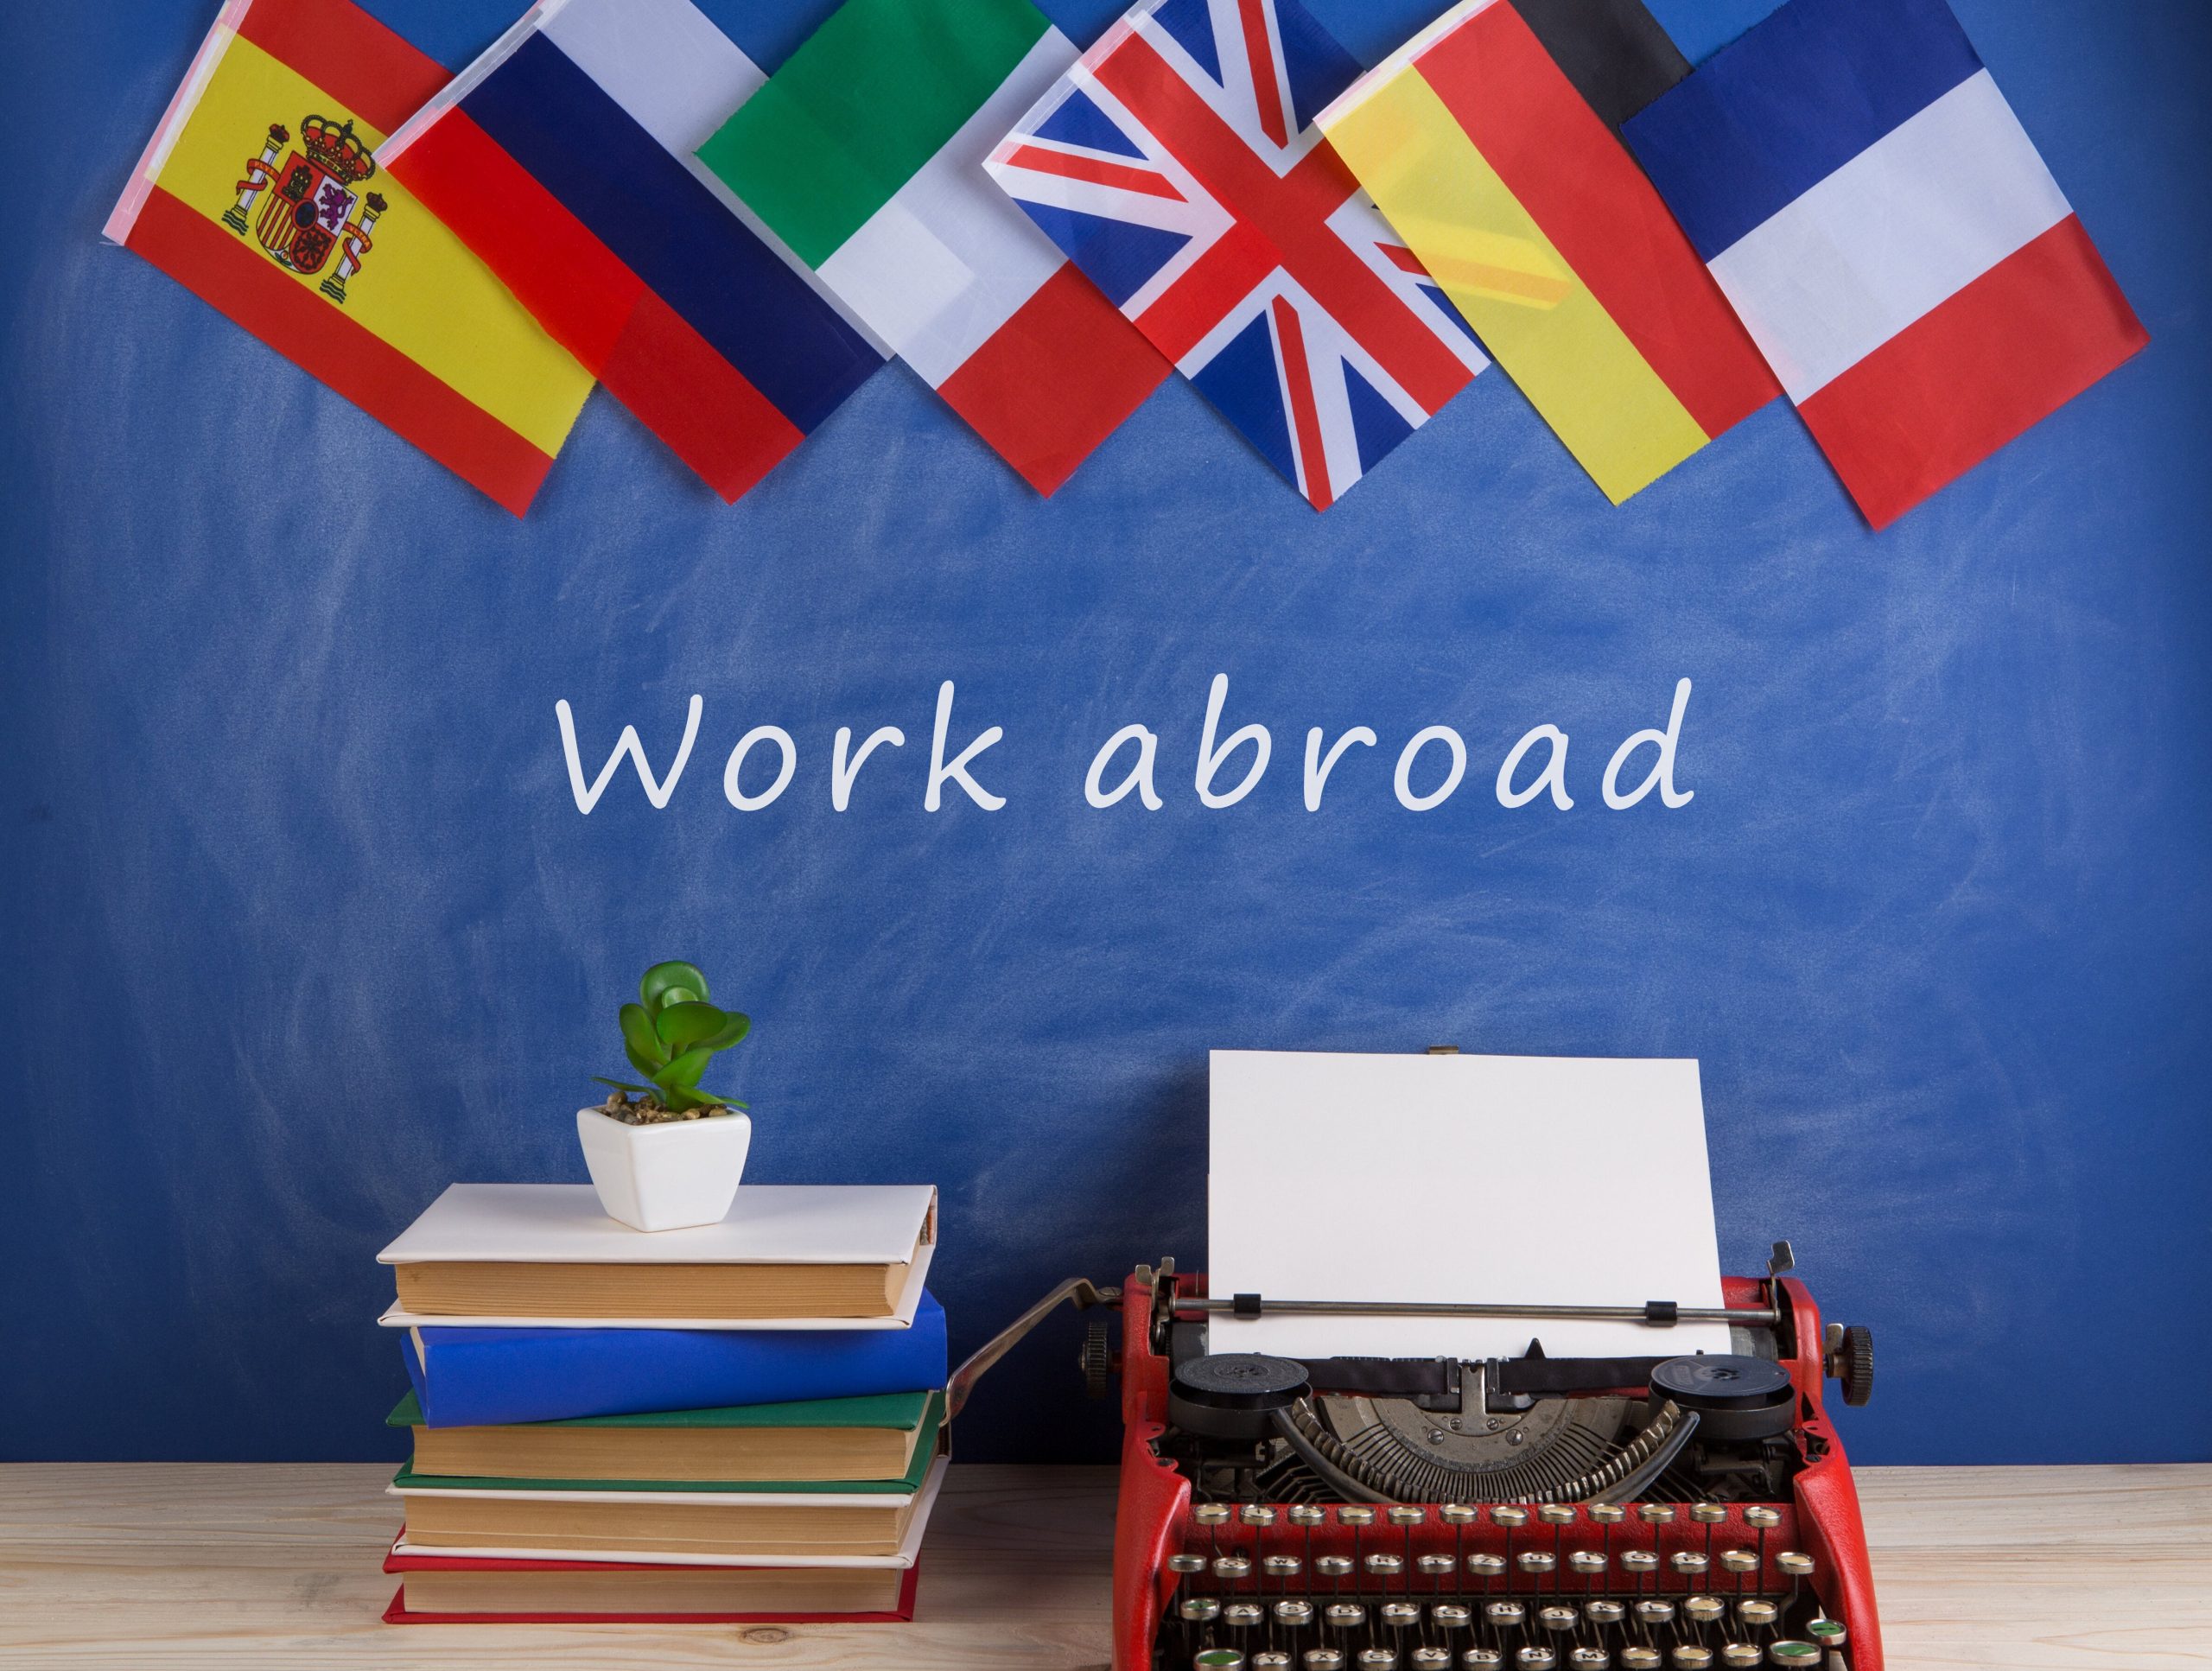 typewriter-flags-spain-france-great-britain-books-other-countries-text-work-abroad (1) (1)